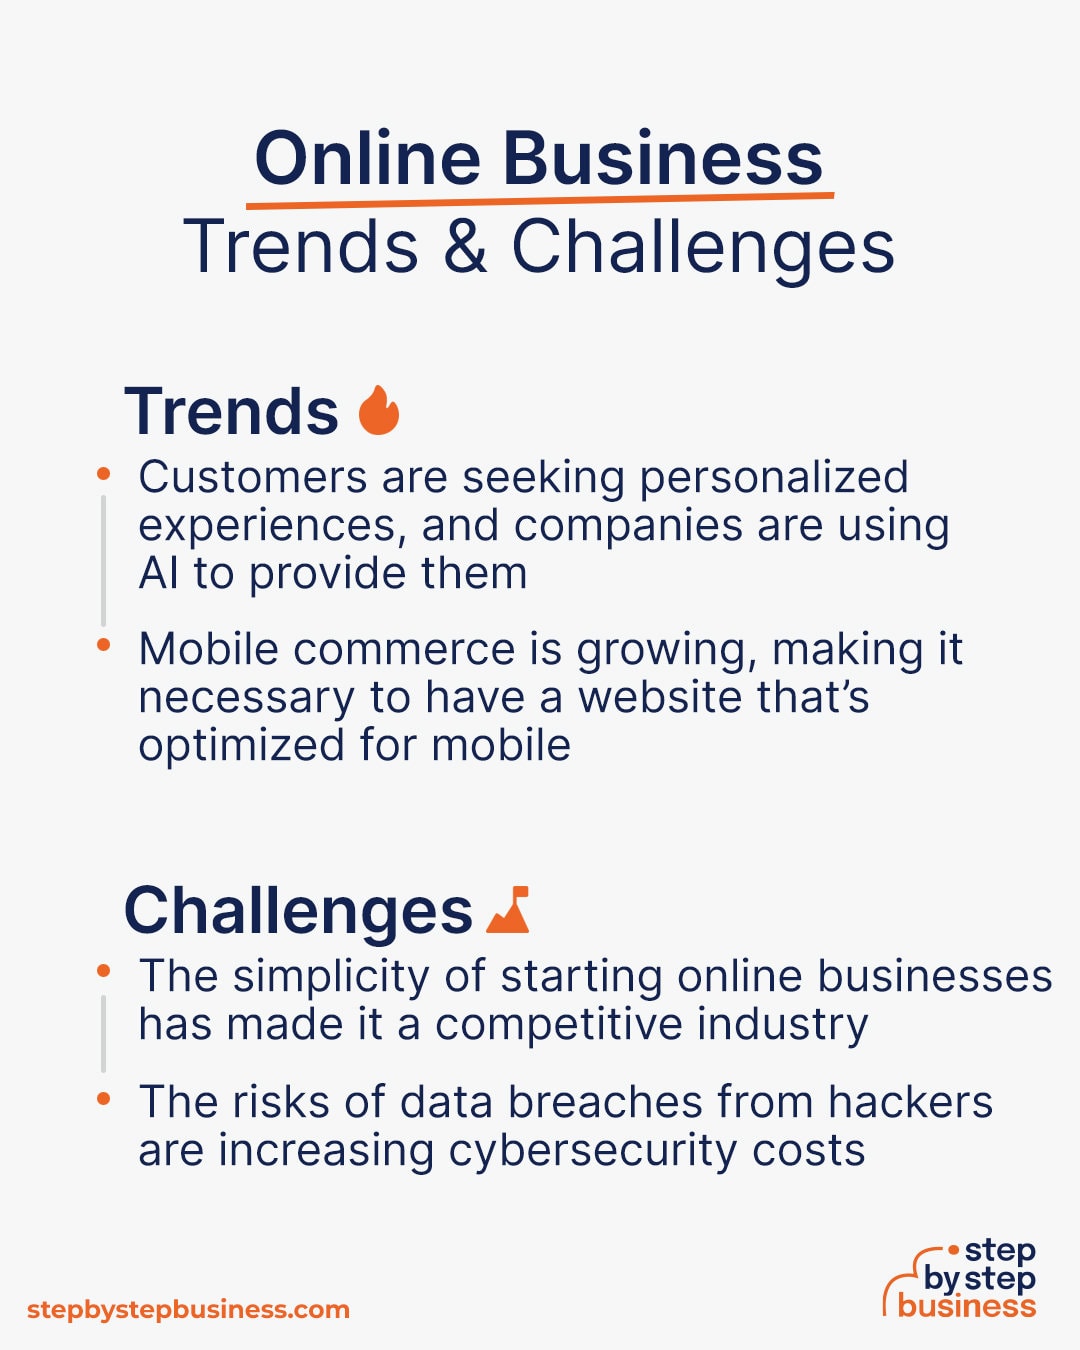 Online Business Trends and Challenges